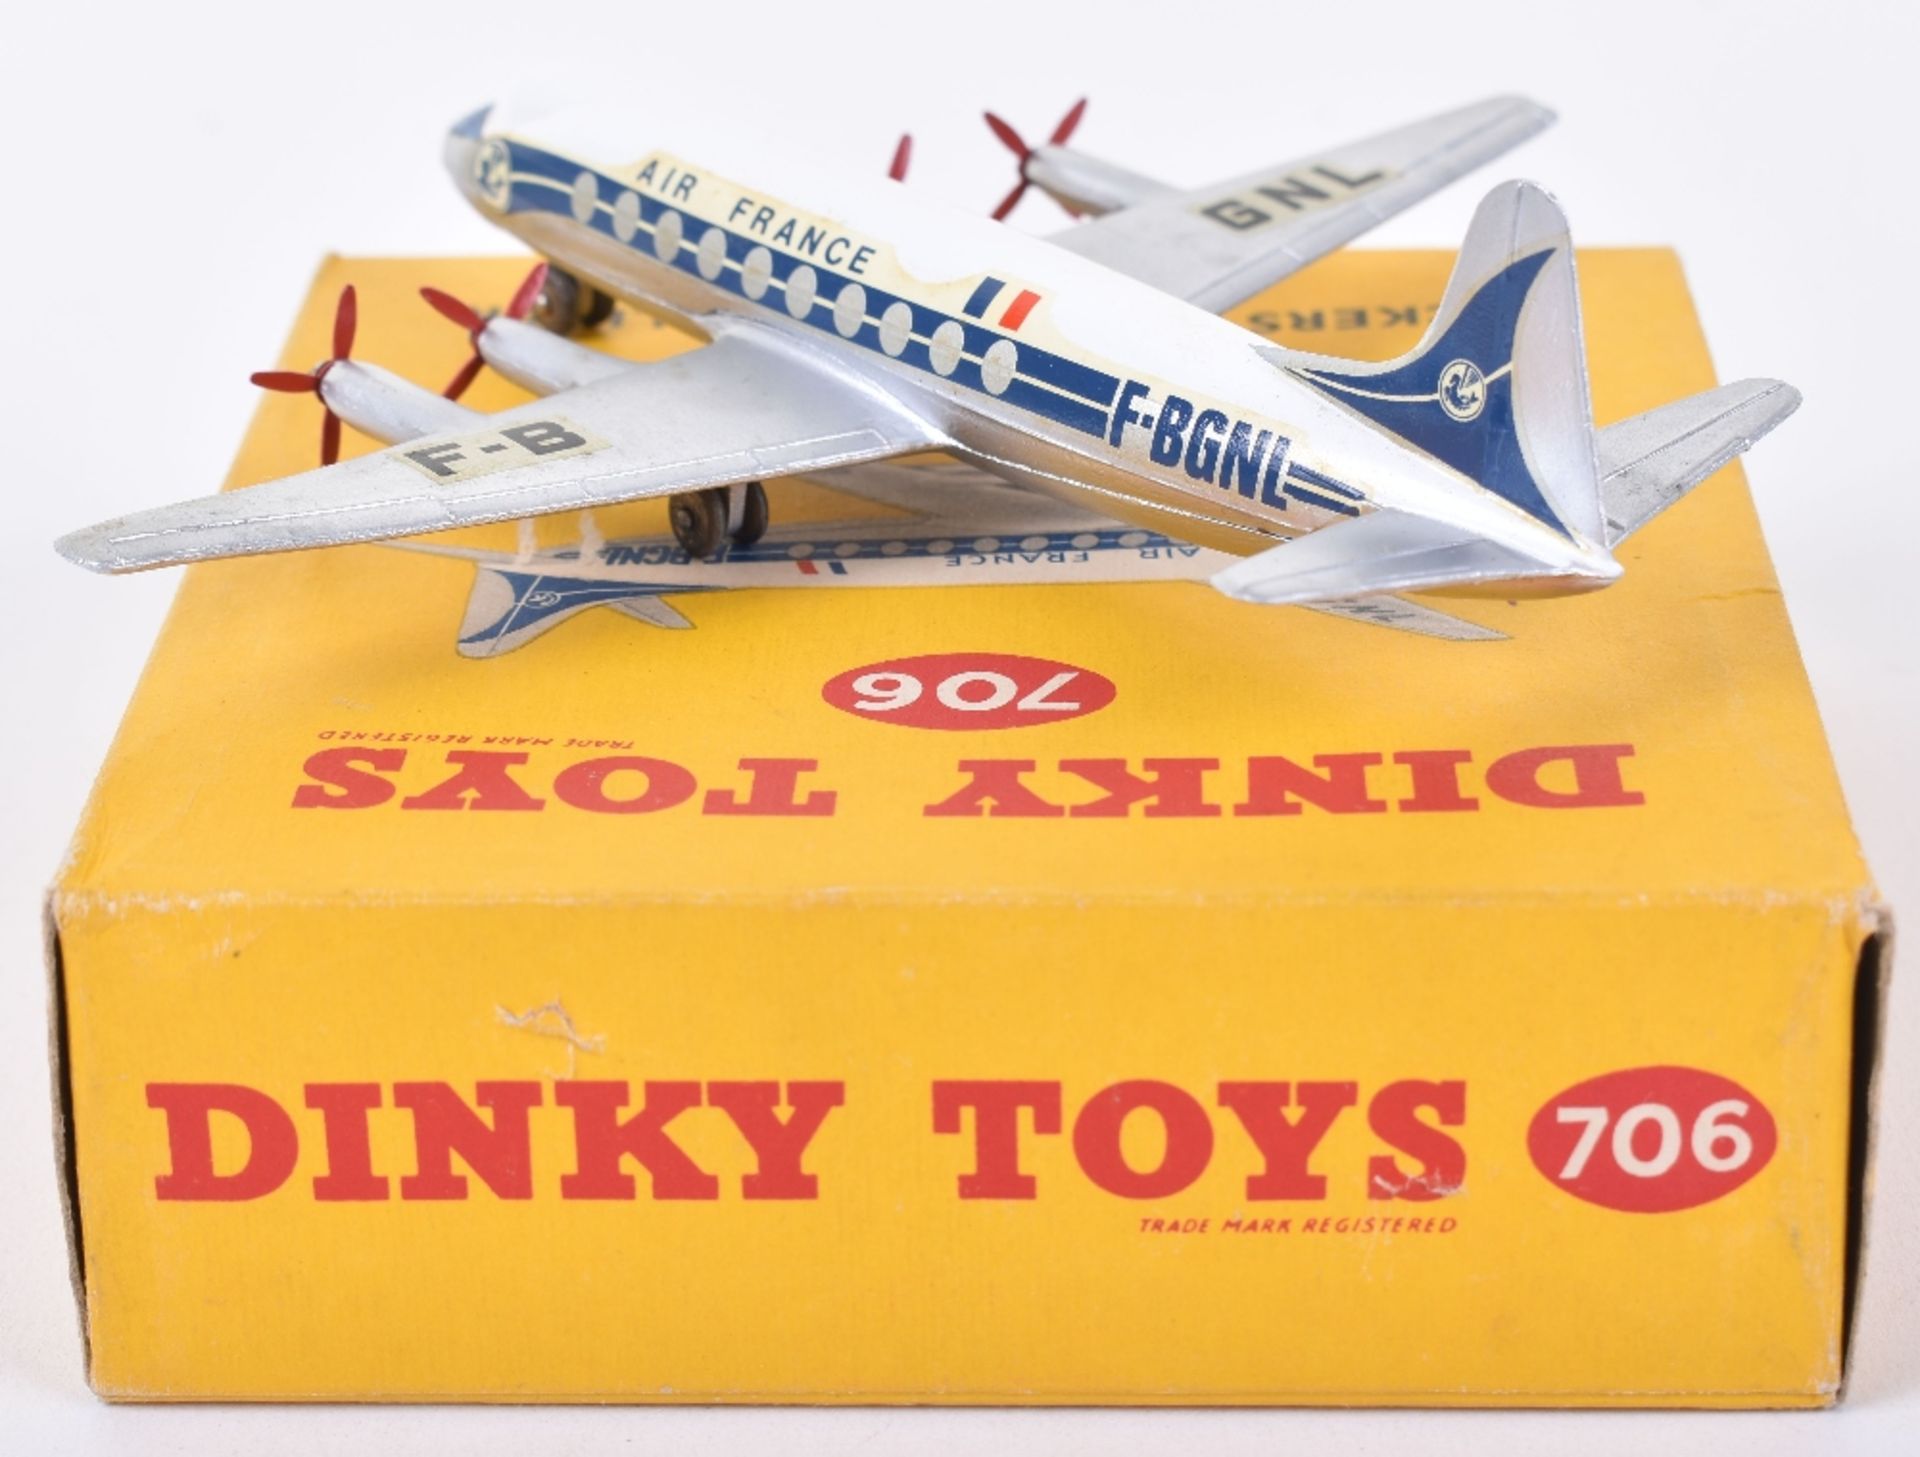 Dinky Toys 706 Vickers Viscount Air Liner “Air France” - Image 2 of 4